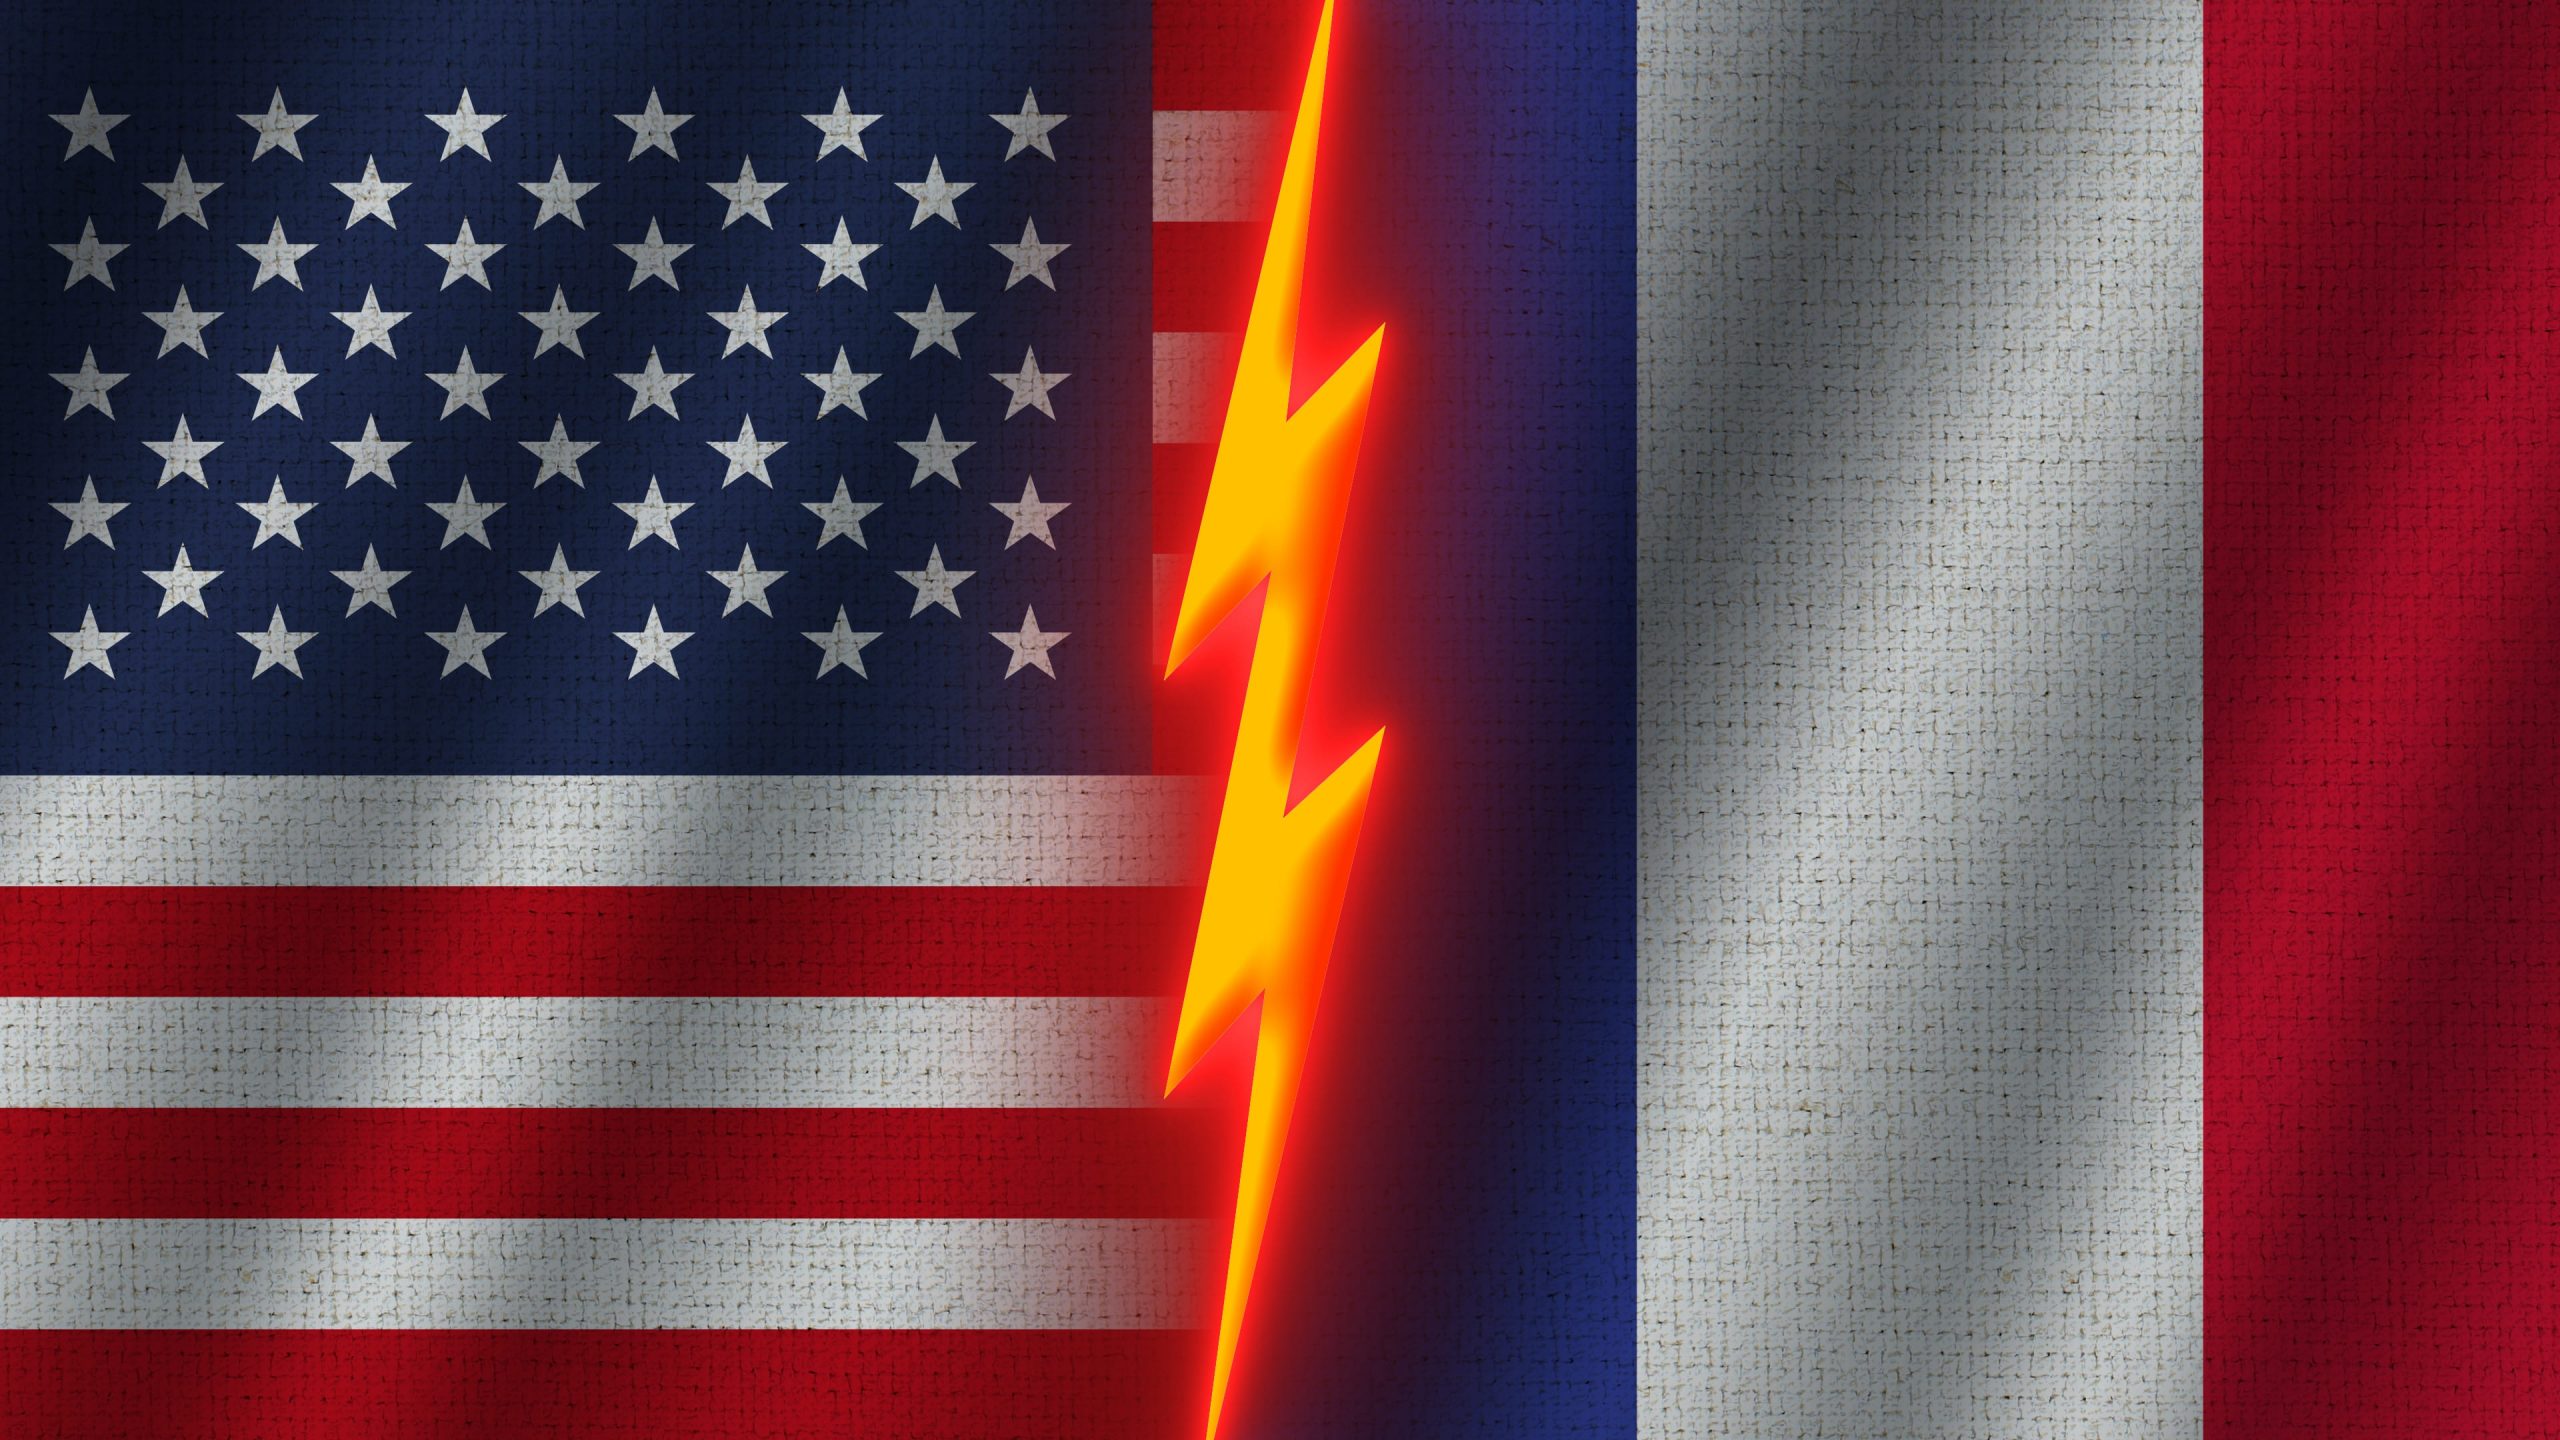 Will US-French Tensions Impact the Arab Region?